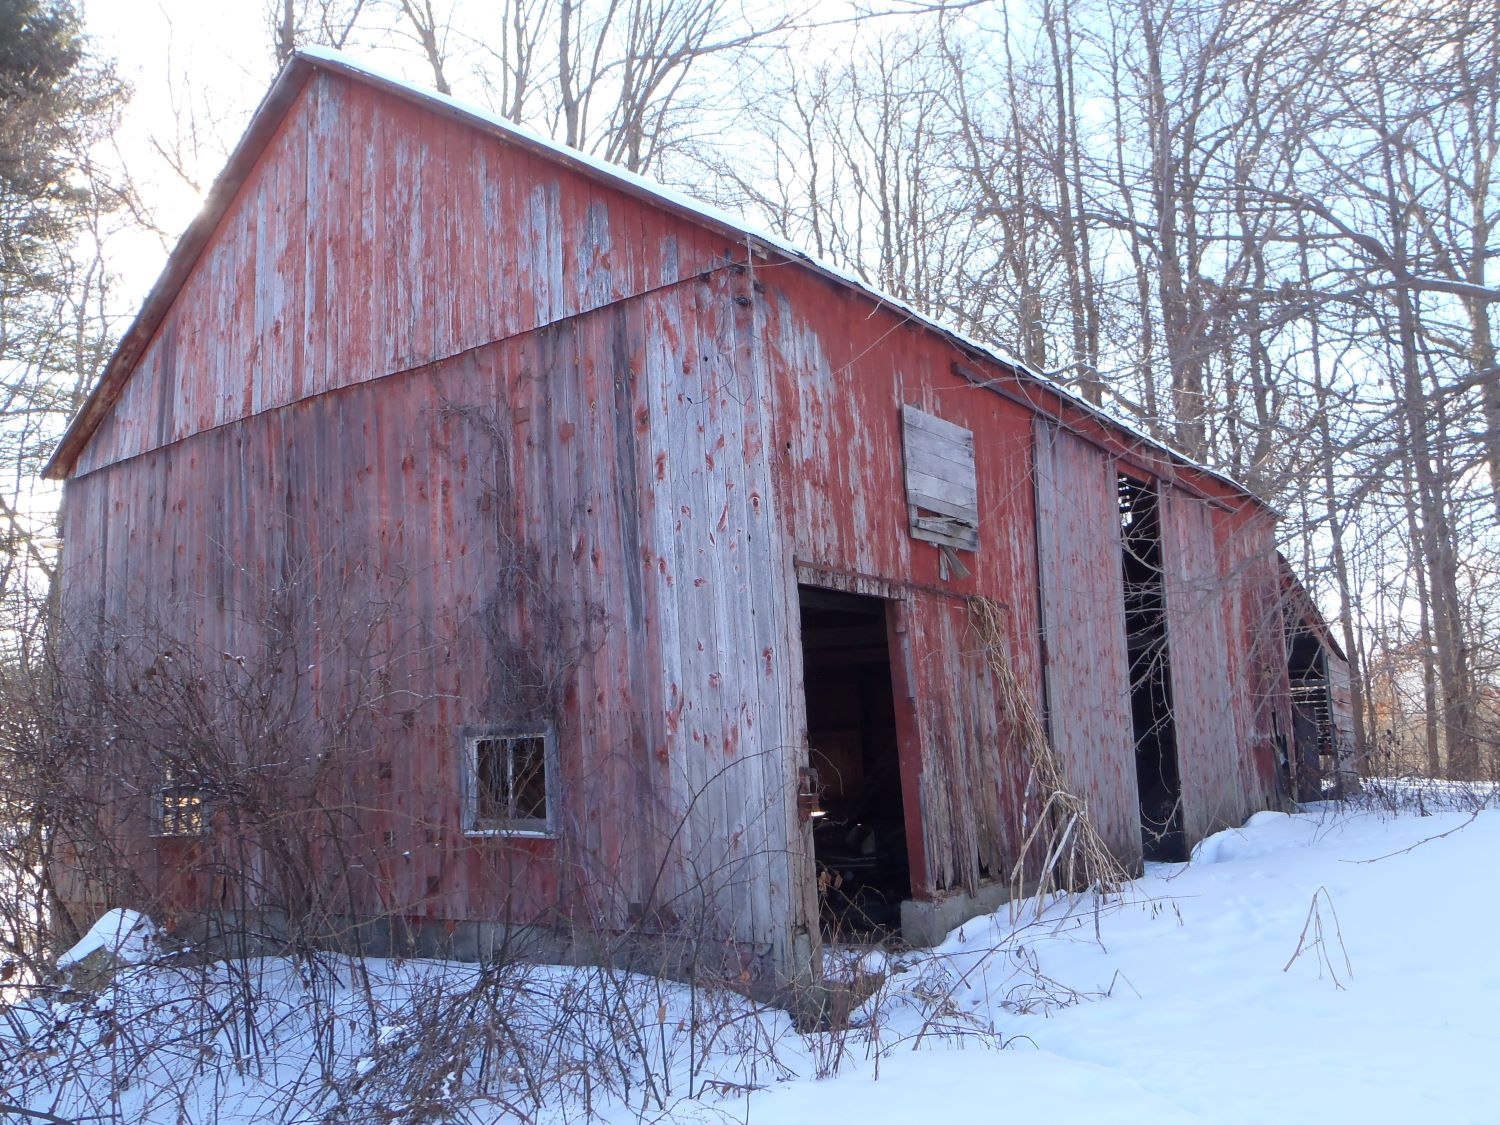 A red barn in Tekonsha, MI during the winter